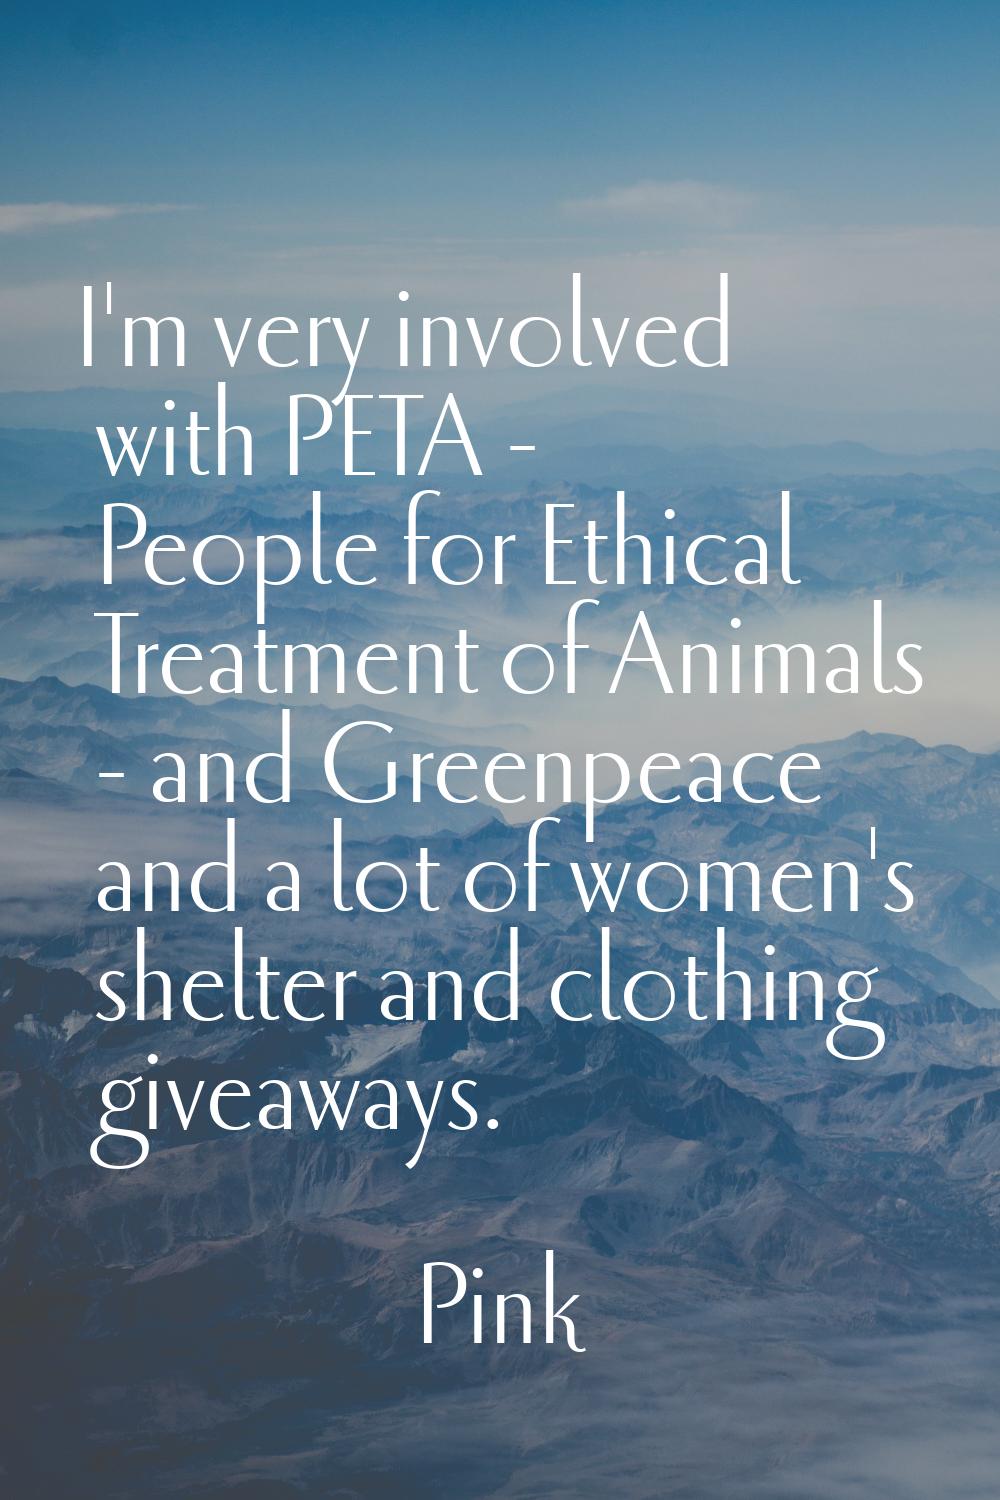 I'm very involved with PETA - People for Ethical Treatment of Animals - and Greenpeace and a lot of